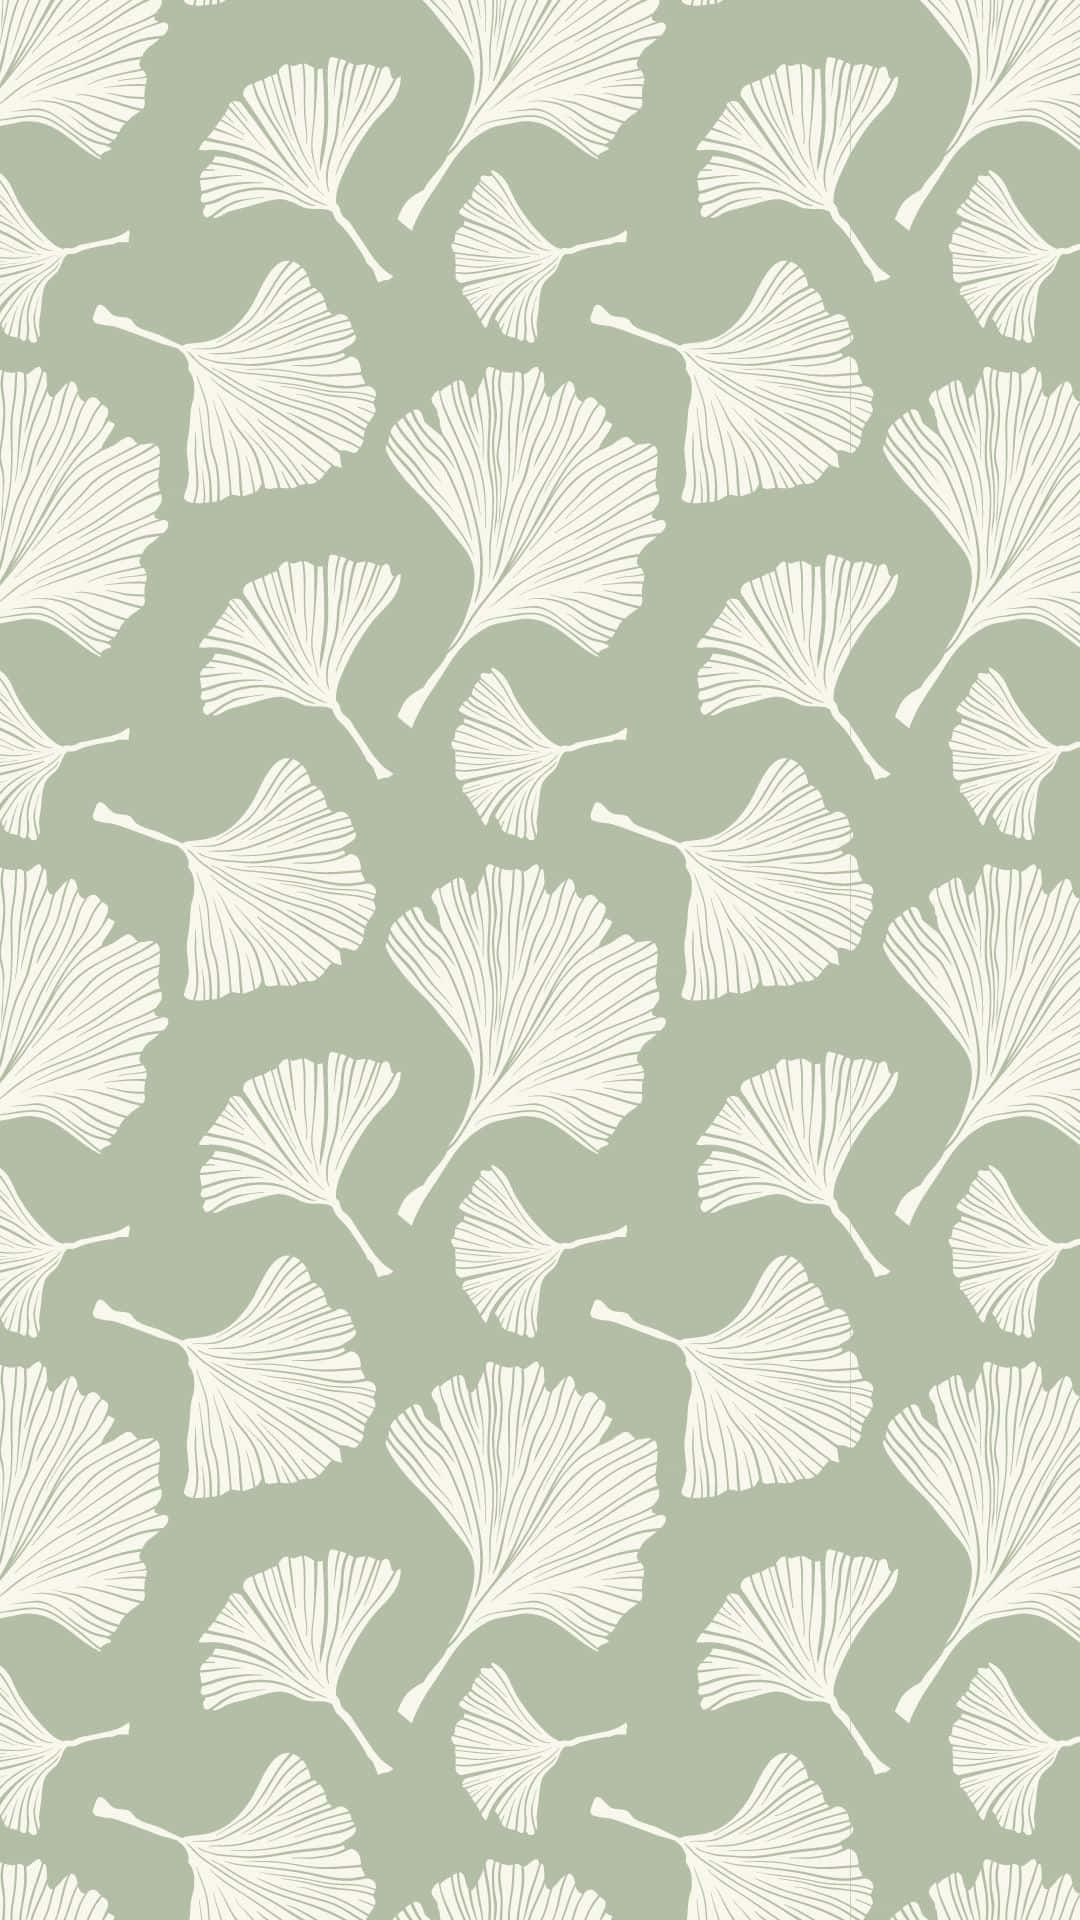 HOLDEN Glistening Ginkgo Leaf Grey NonPasted Wallpaper Covers 56 sq ft  12702  The Home Depot